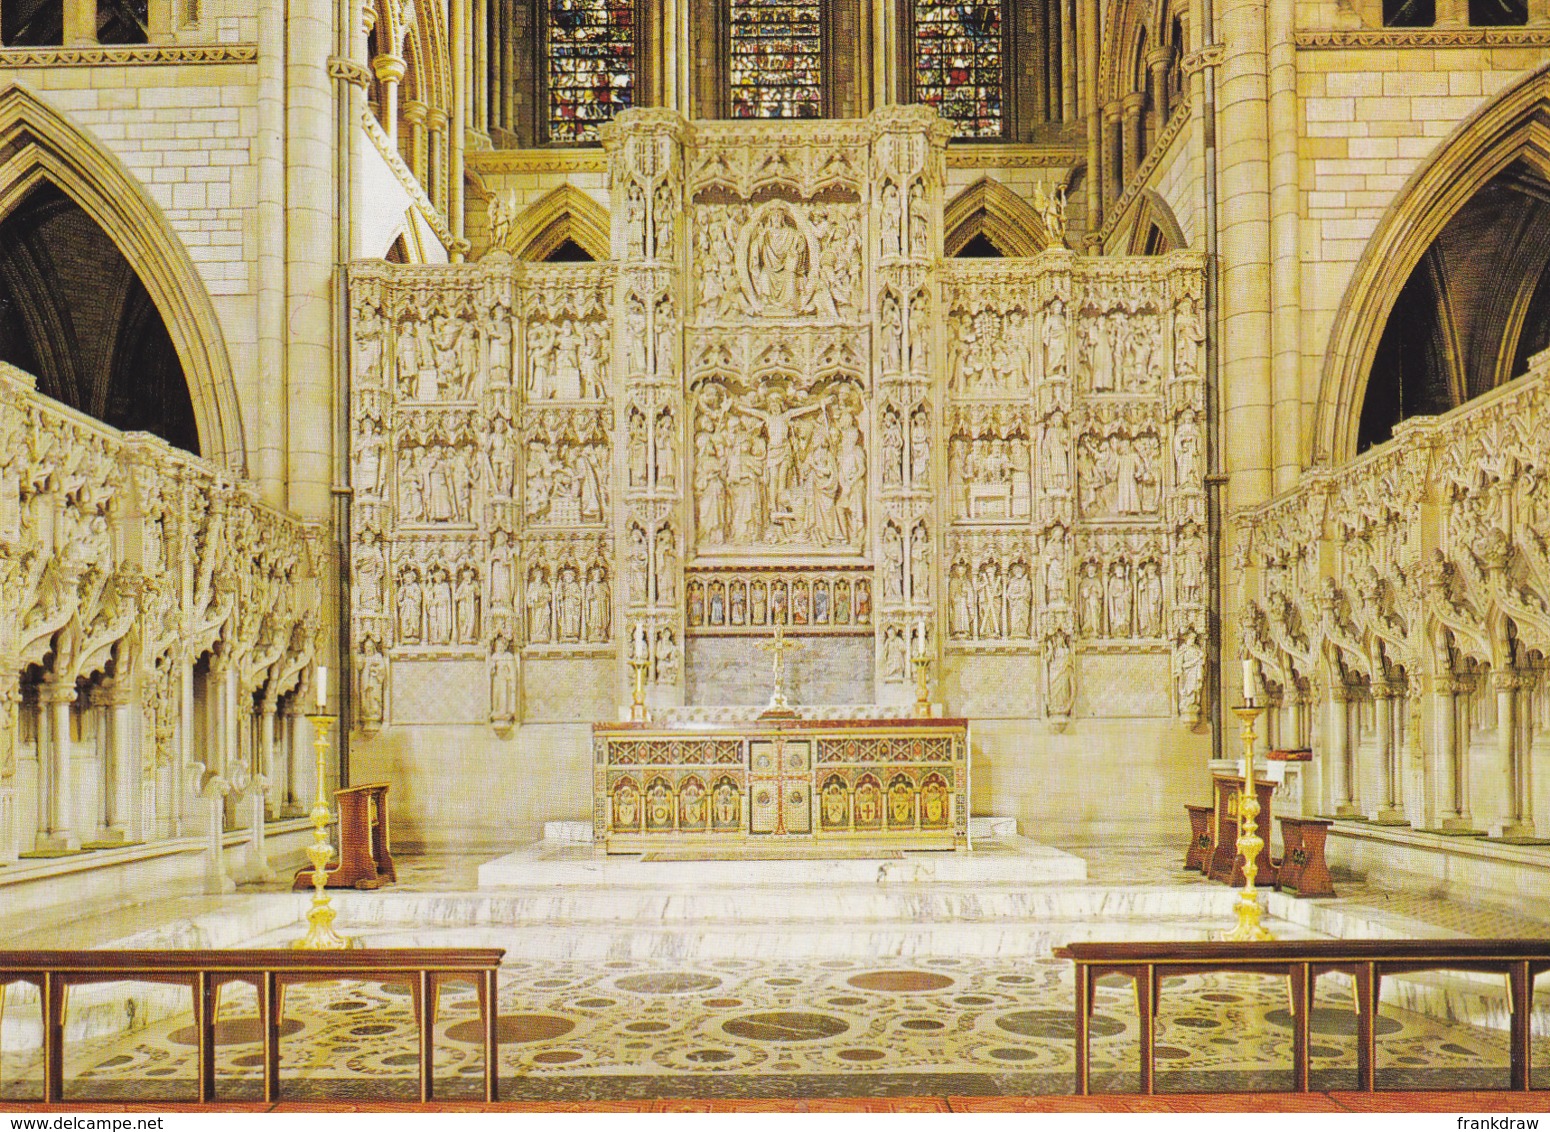 Postcard - Truro Cathedral - The Sanctuary Showing The High Alter  - Card No. C 5427X - VG - Non Classés